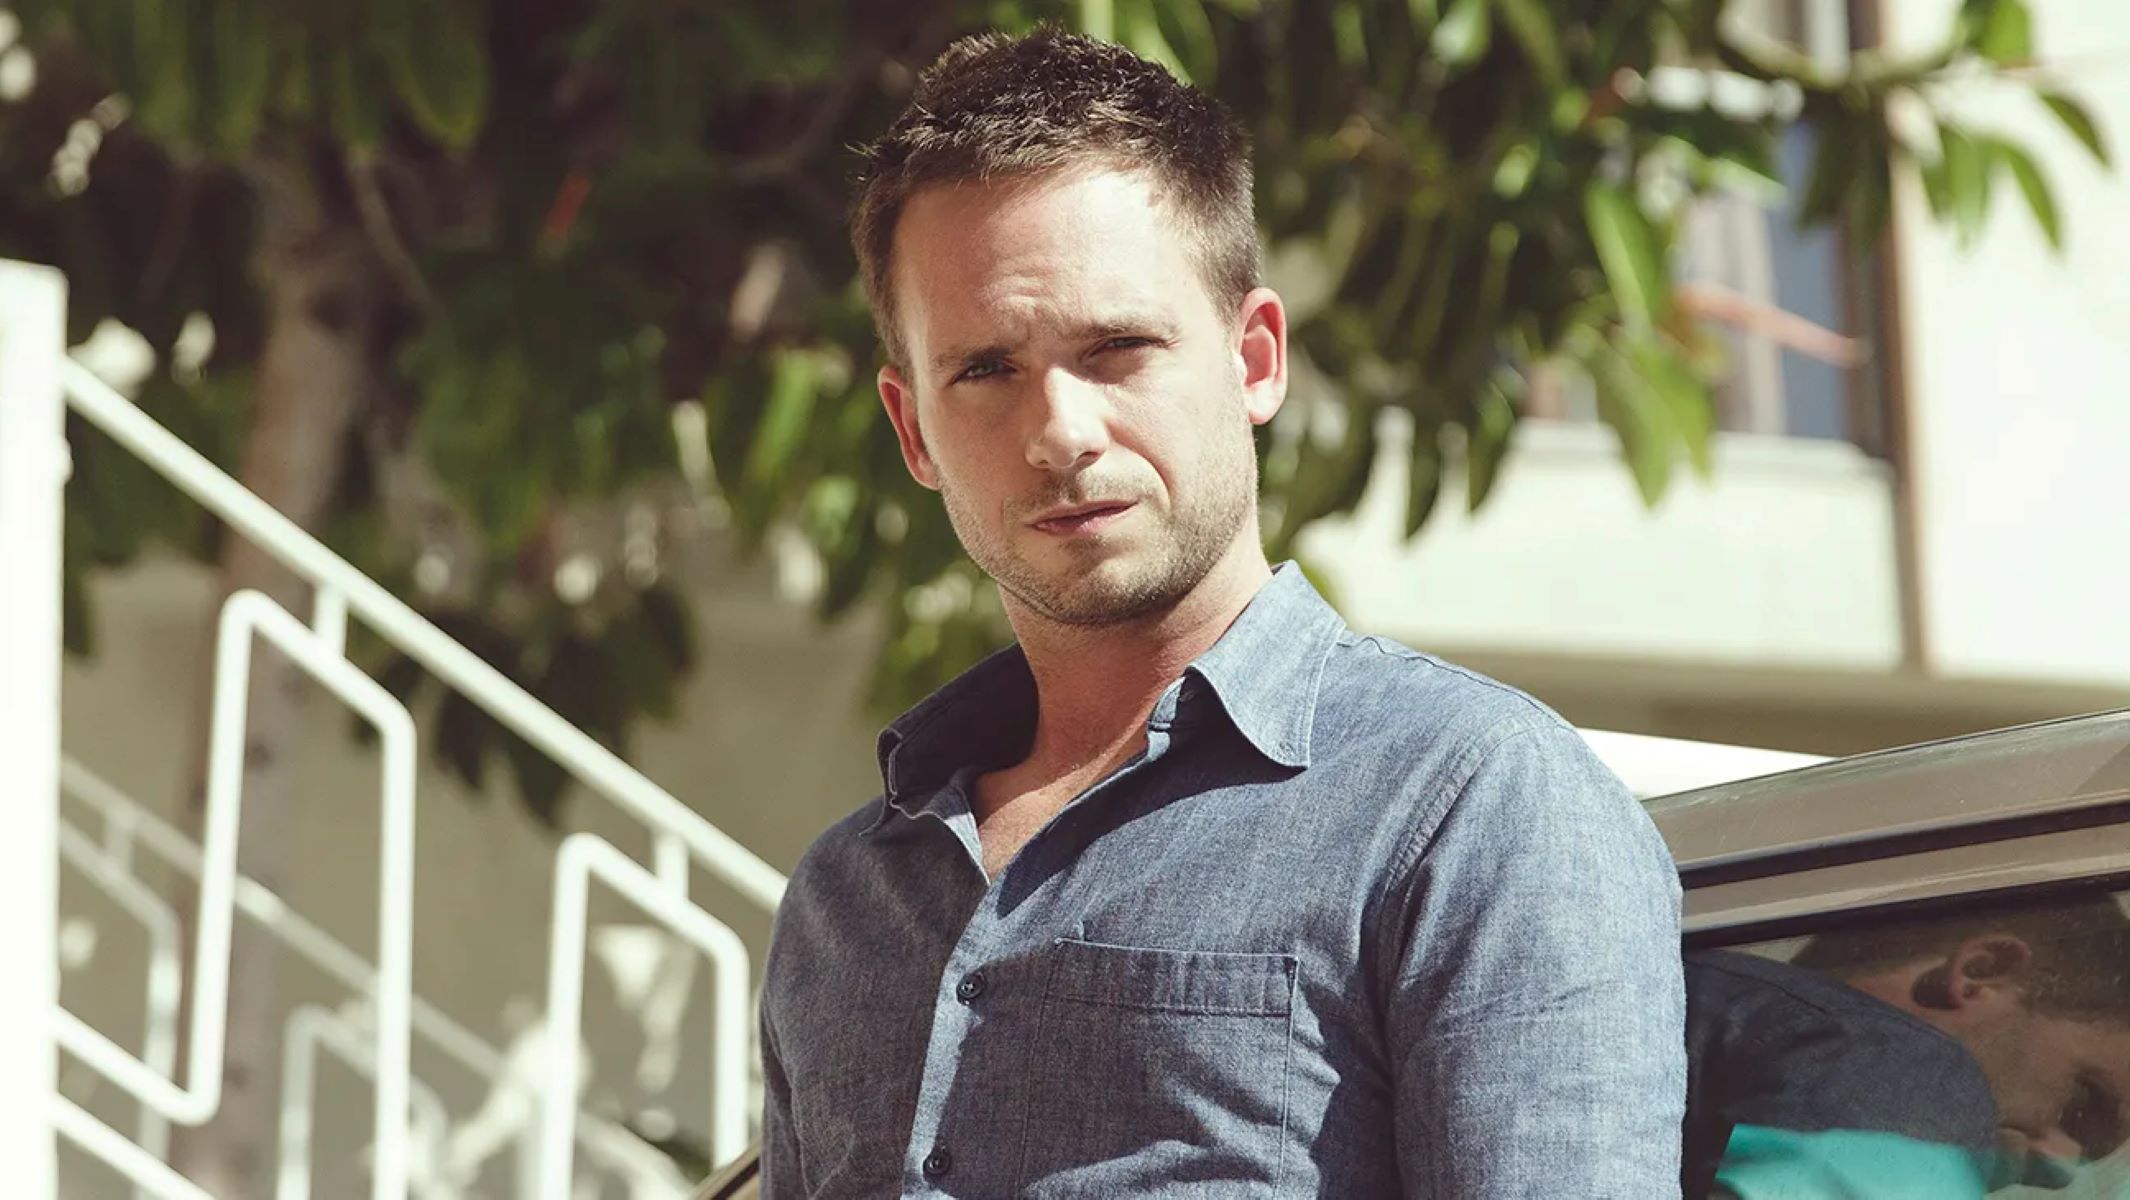 Suits Star Patrick J. Adams Apologizes For Posting Meghan Markle Pics Amid Strike